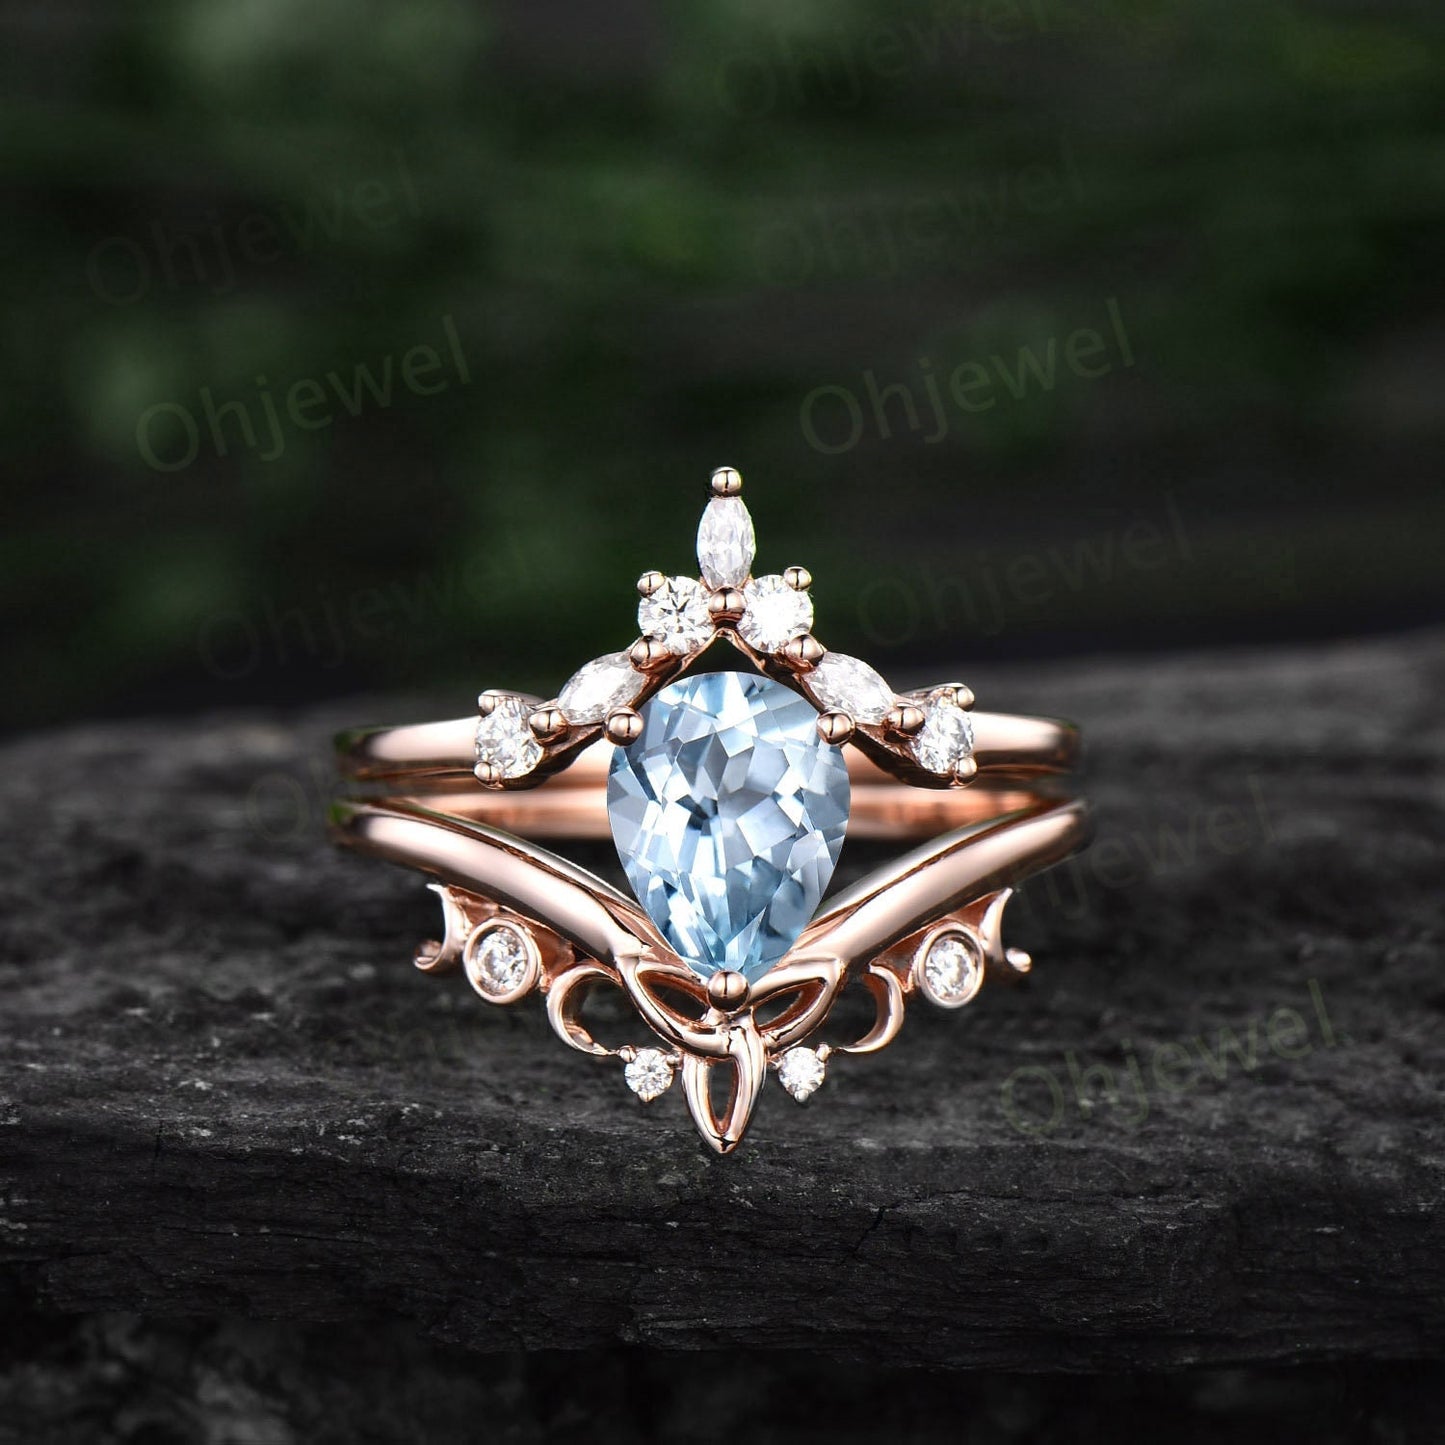 Pear shaped Aquamarine ring rose gold vintage cluster unique engagement ring marquise diamond anniversary promise wedding ring set for women